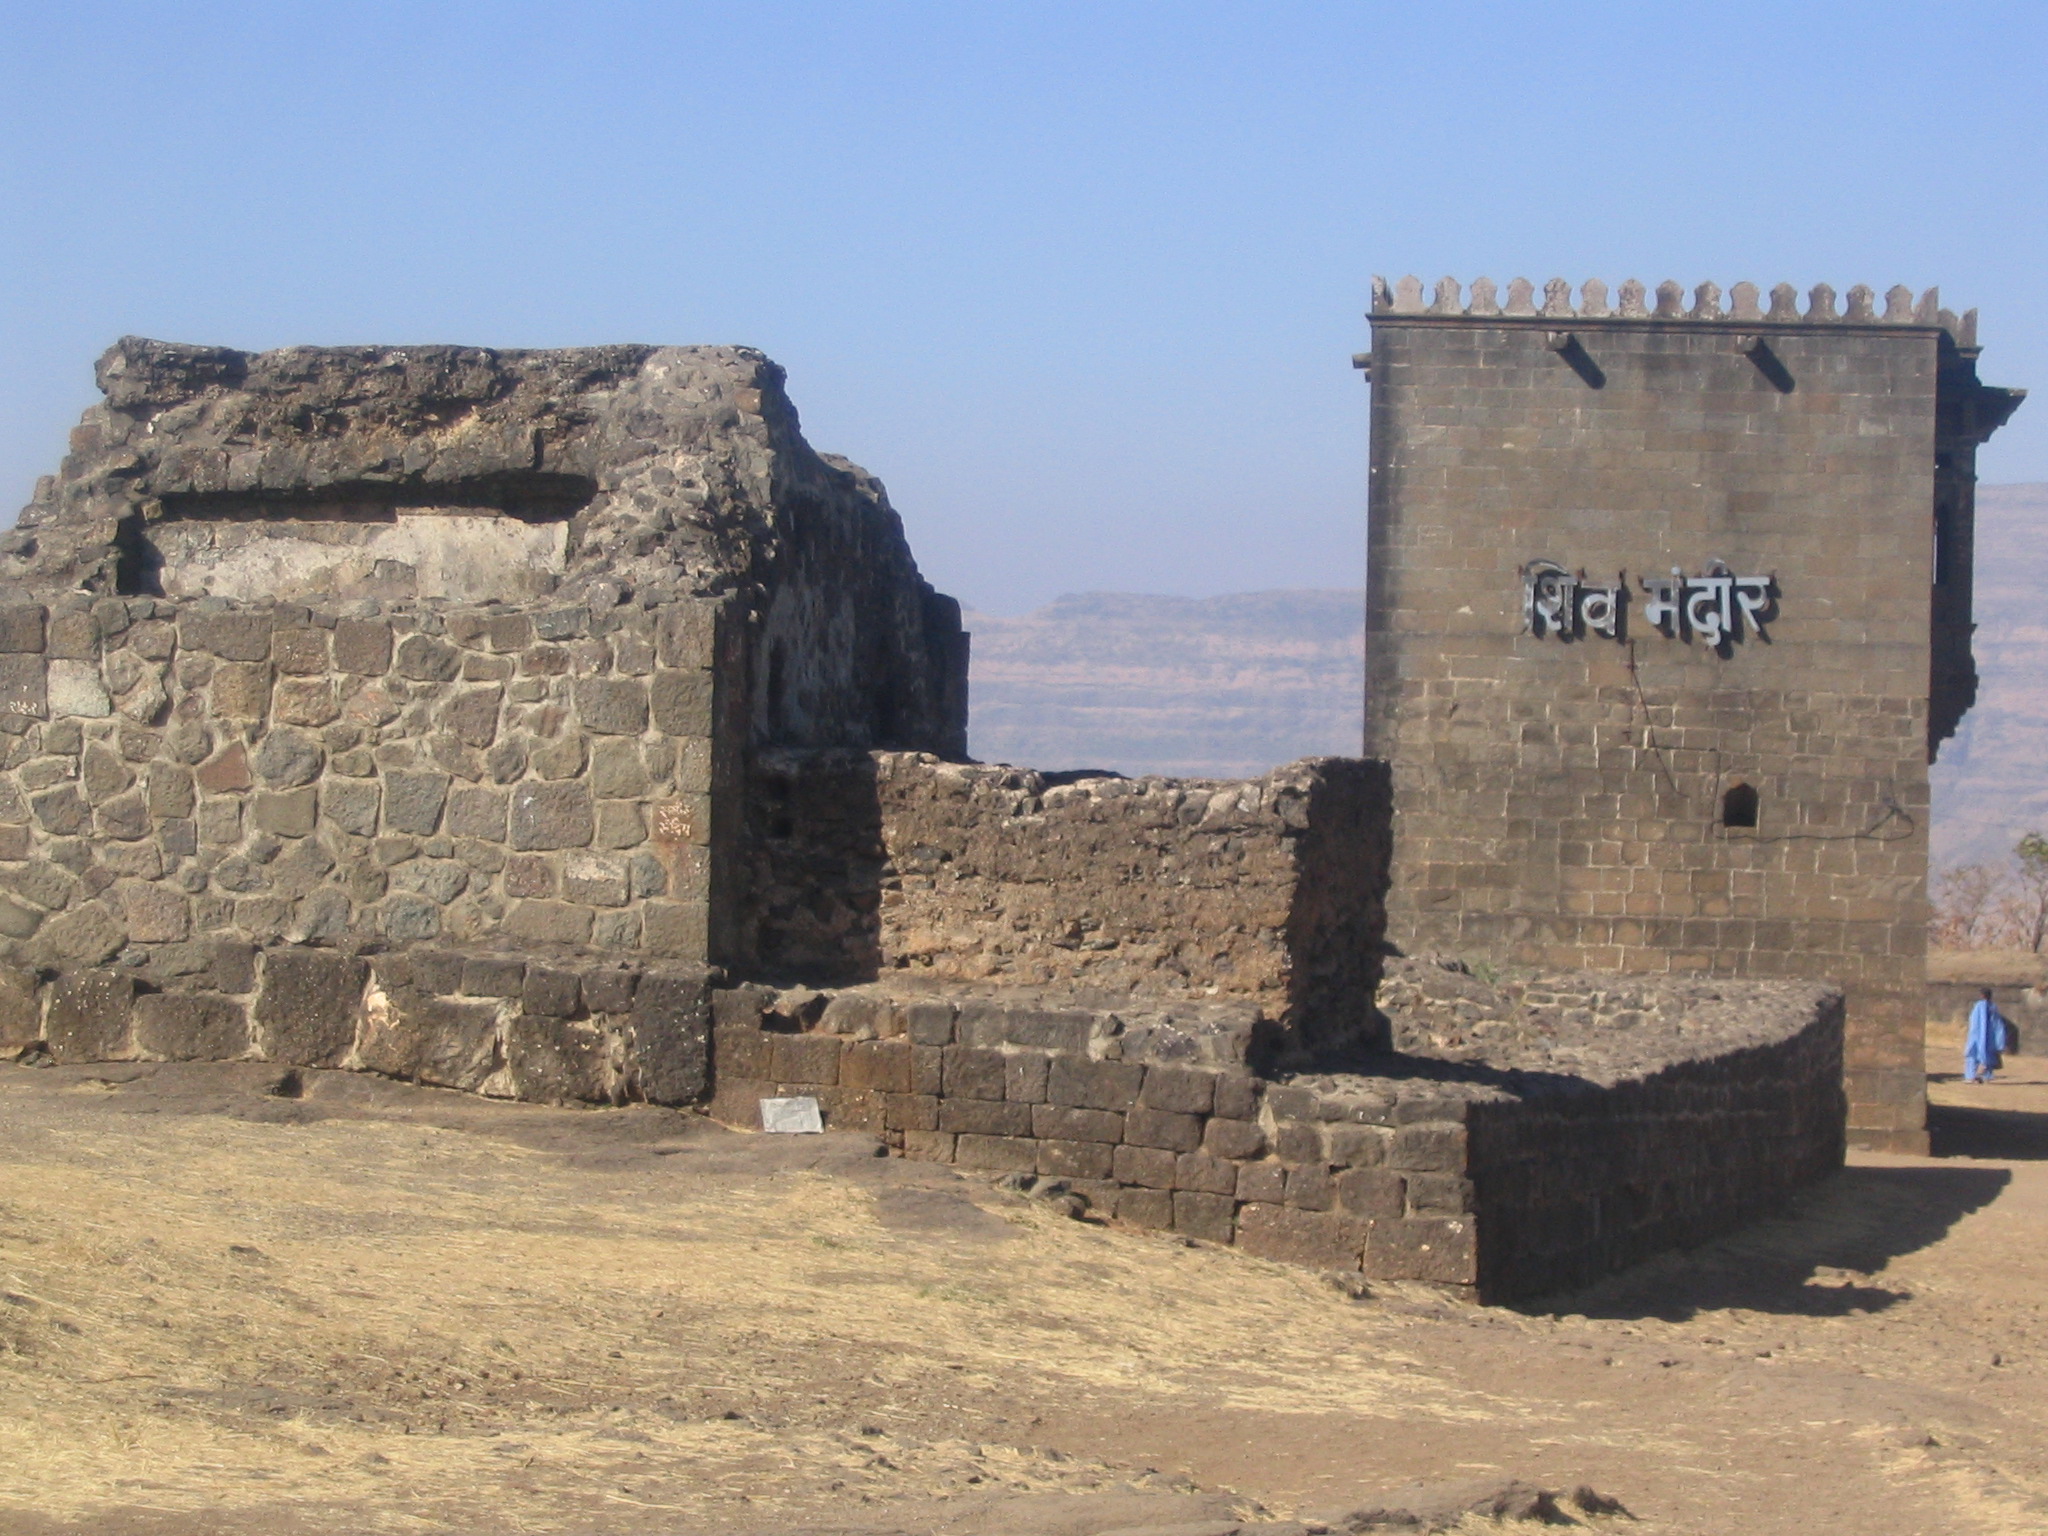 23 crore sanctioned for conservation of Shivneri fort, information of Aditya Thackeray